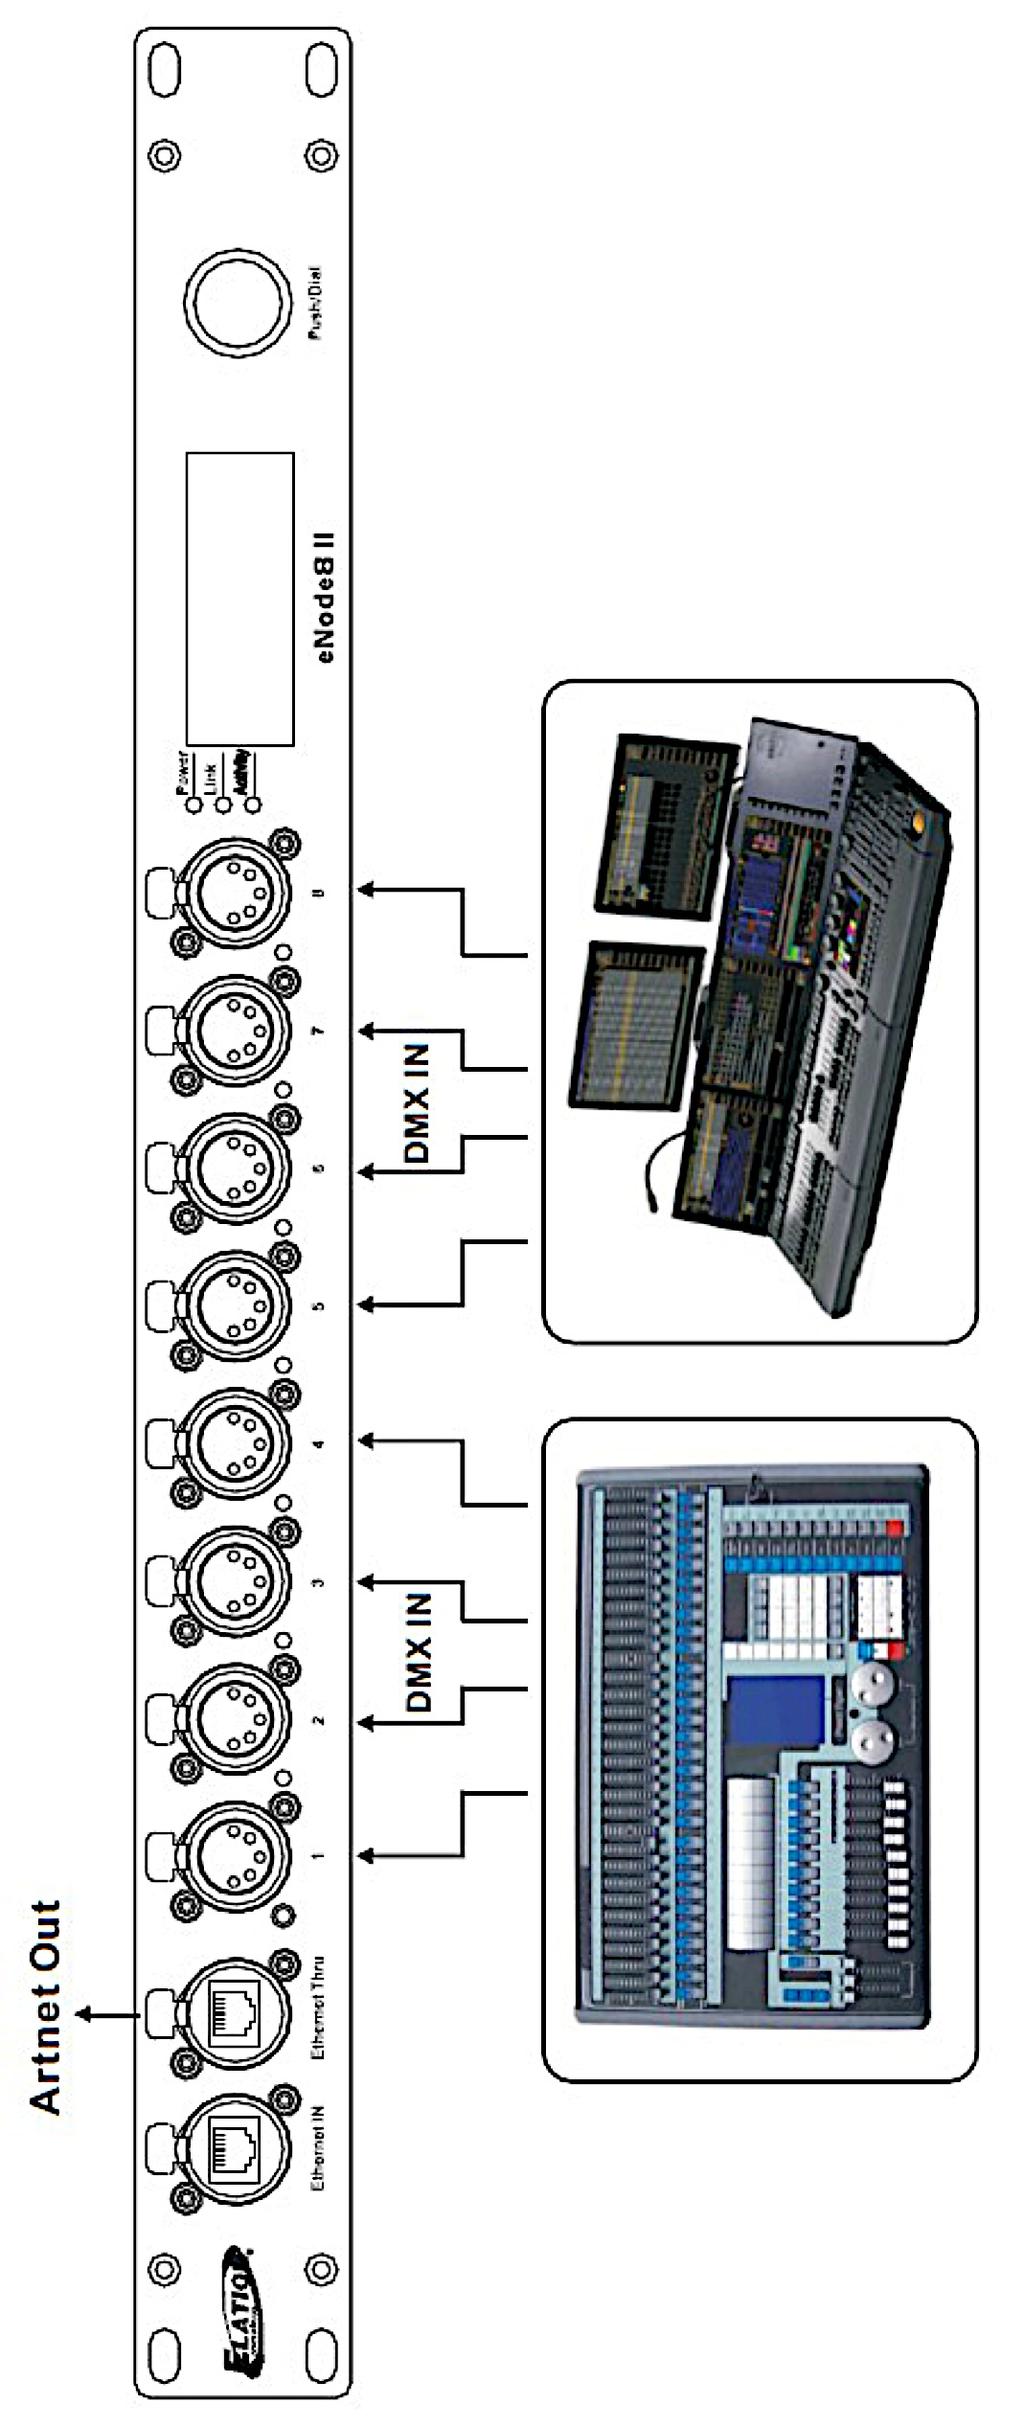 1-8 DMX PORT INPUT You can set the Port Status of any the DMX Ports 1-8 as Input (IN). Then only the principle universal is available. It can be set within the range 0.0 - F.